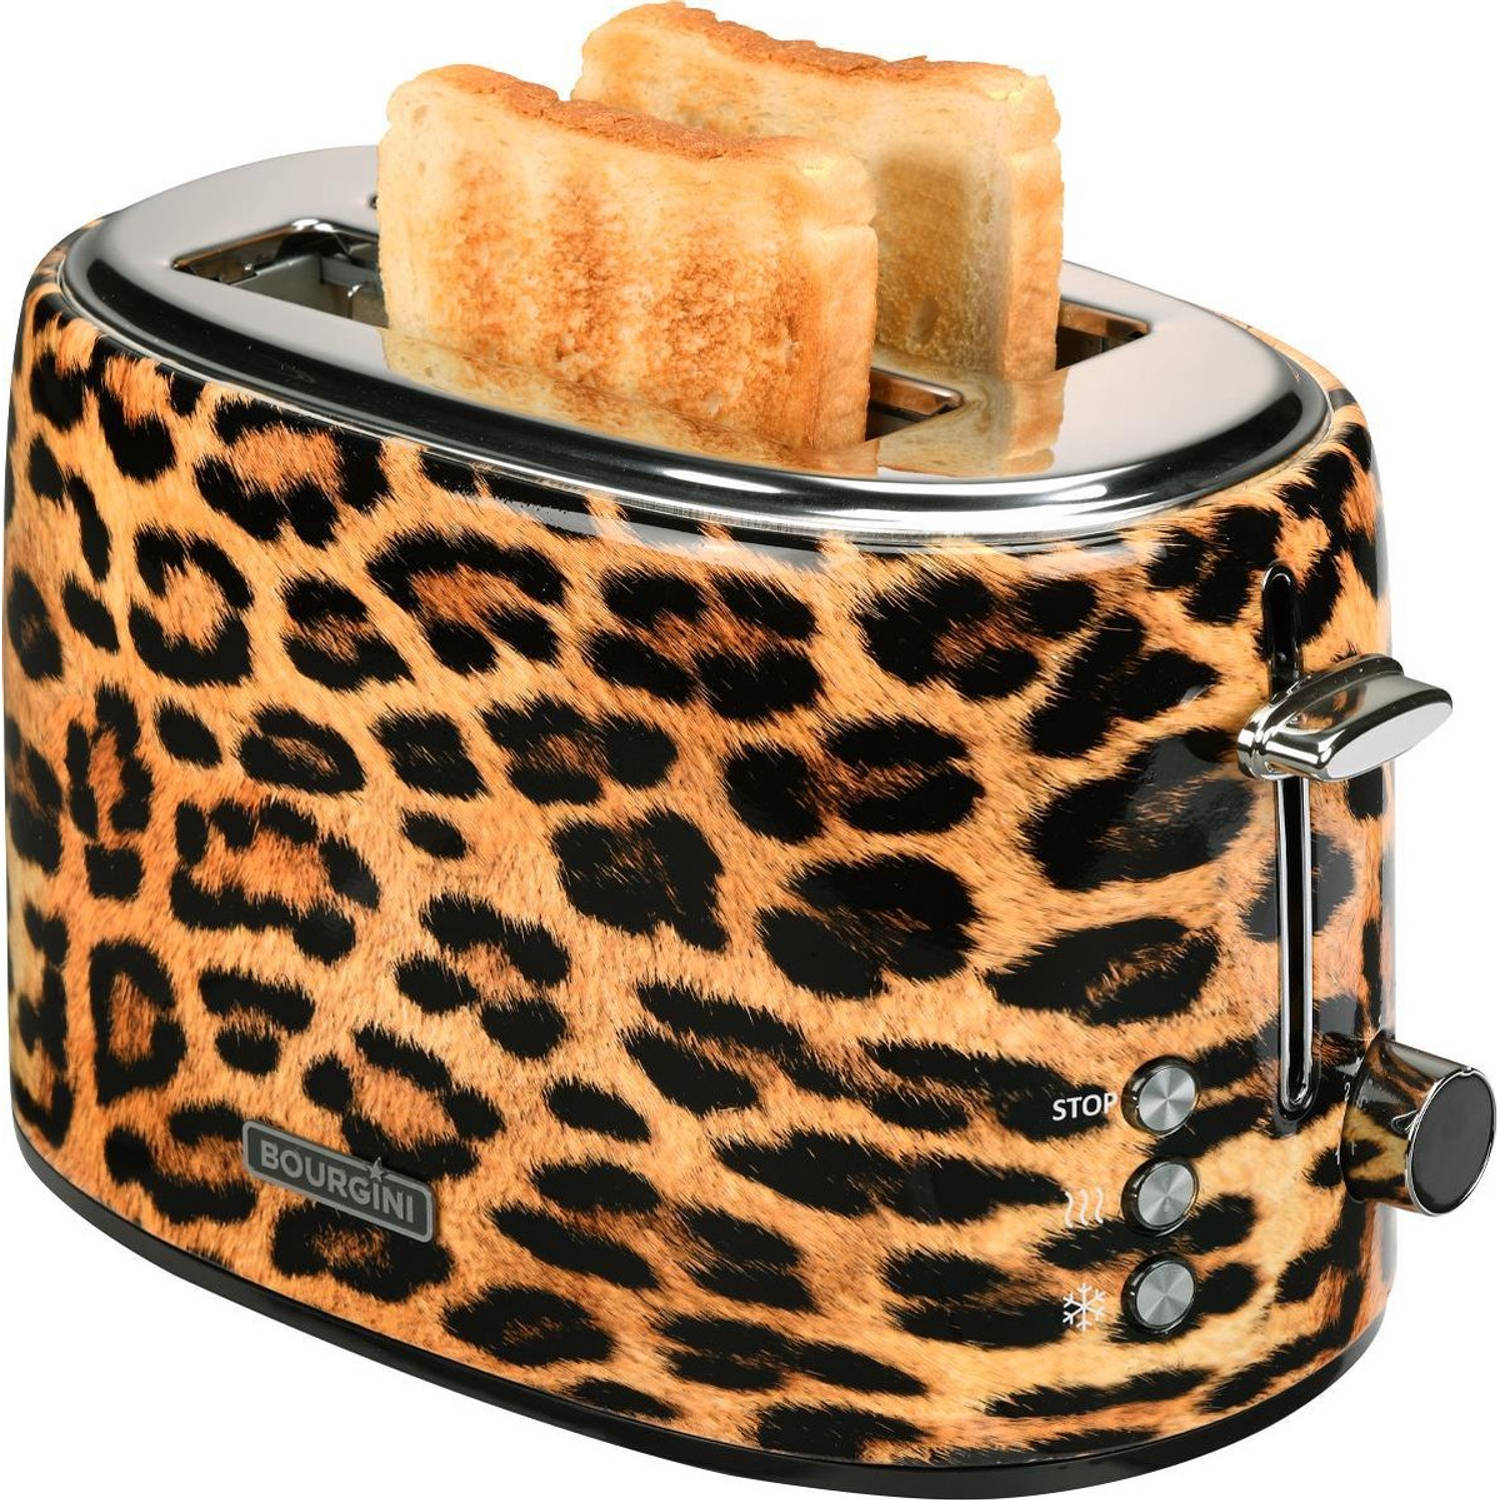 Bourgini Panther Toaster - broodrooster